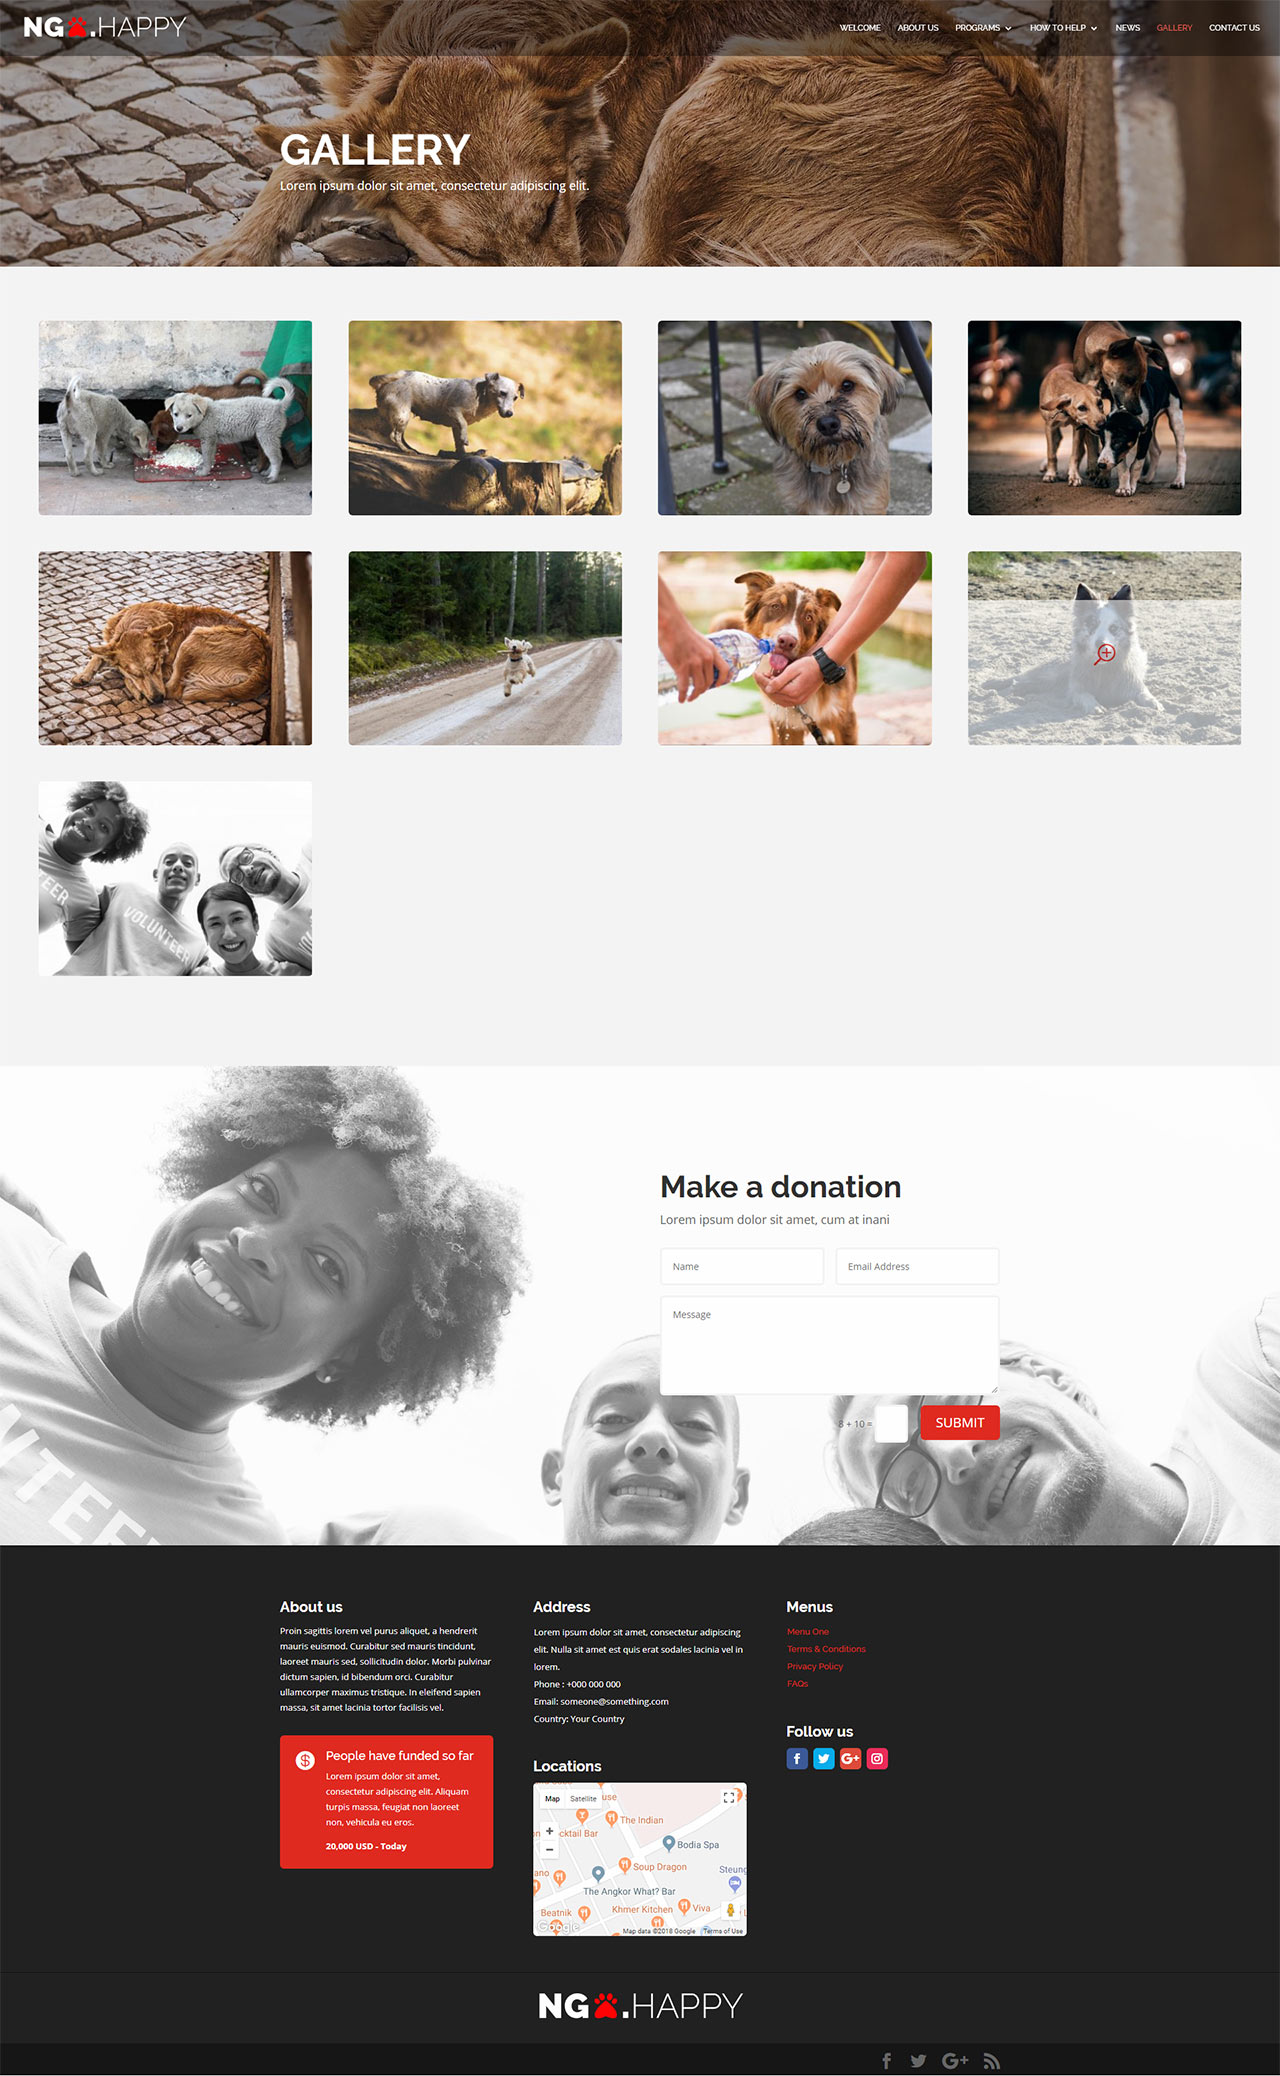 NGO.Happy gallery page